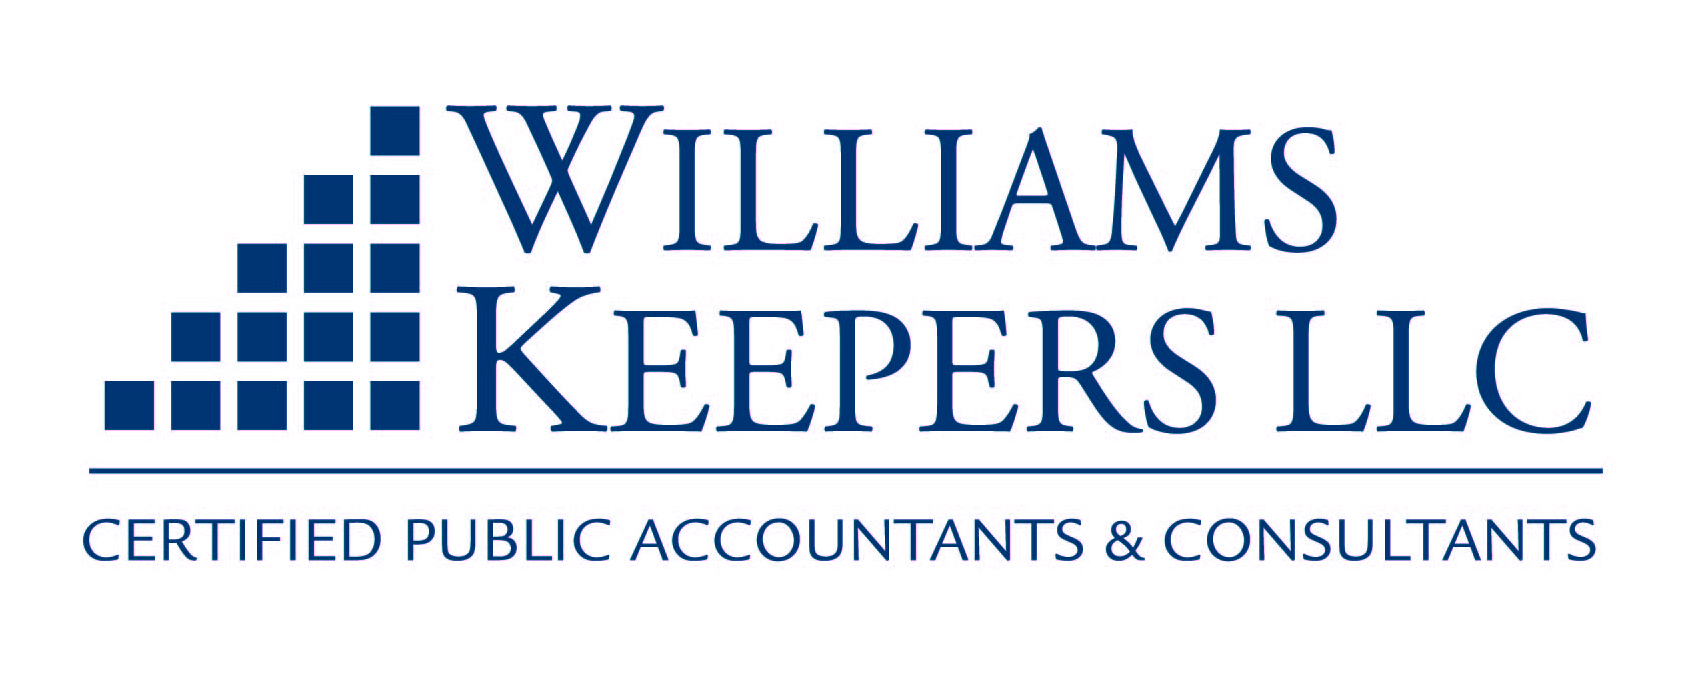 Williams-Keepers